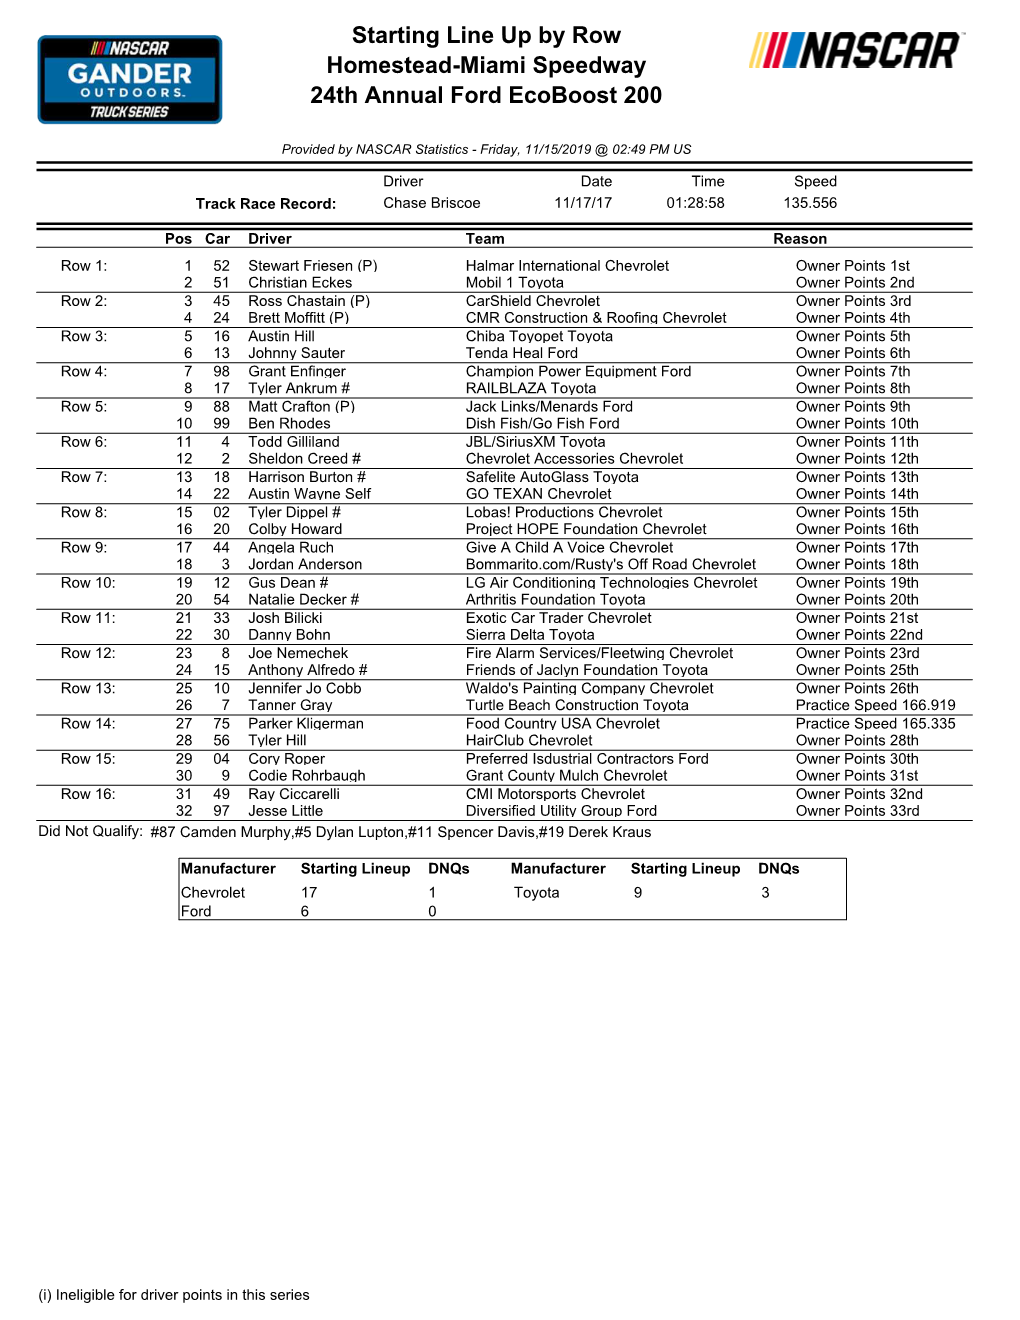 Starting Line up by Row Homestead-Miami Speedway 24Th Annual Ford Ecoboost 200